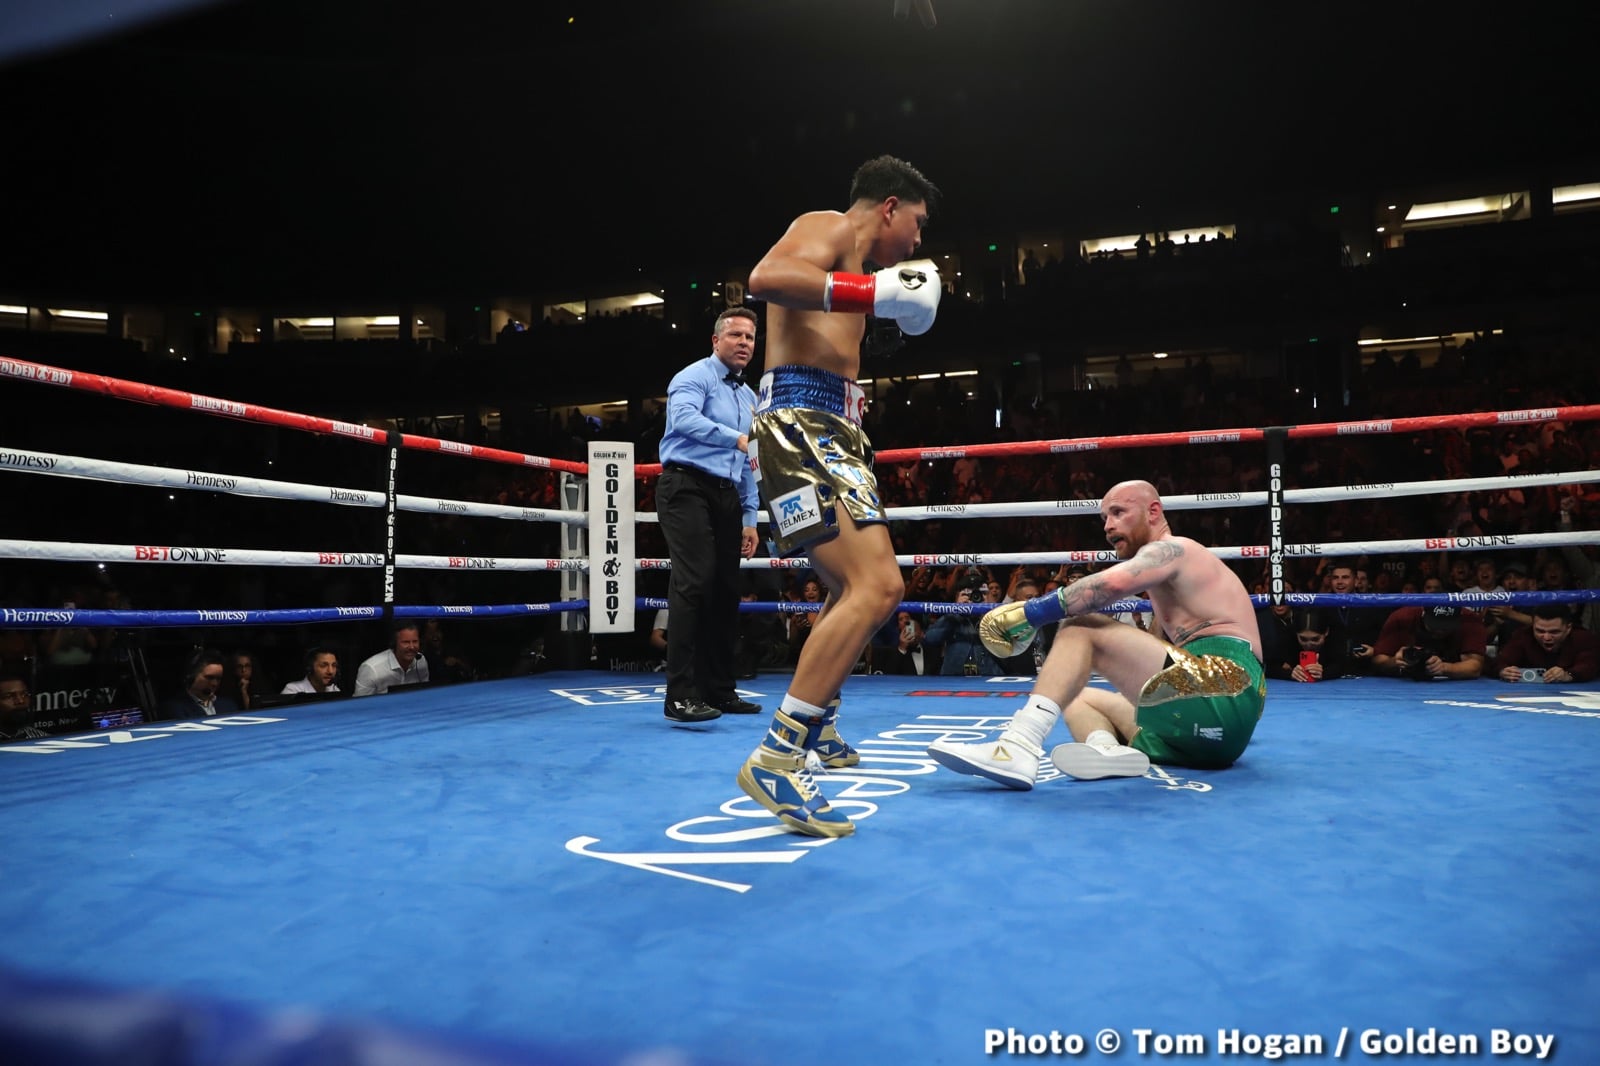 Munguia stops Kelly in 5th round KO - Boxing Results